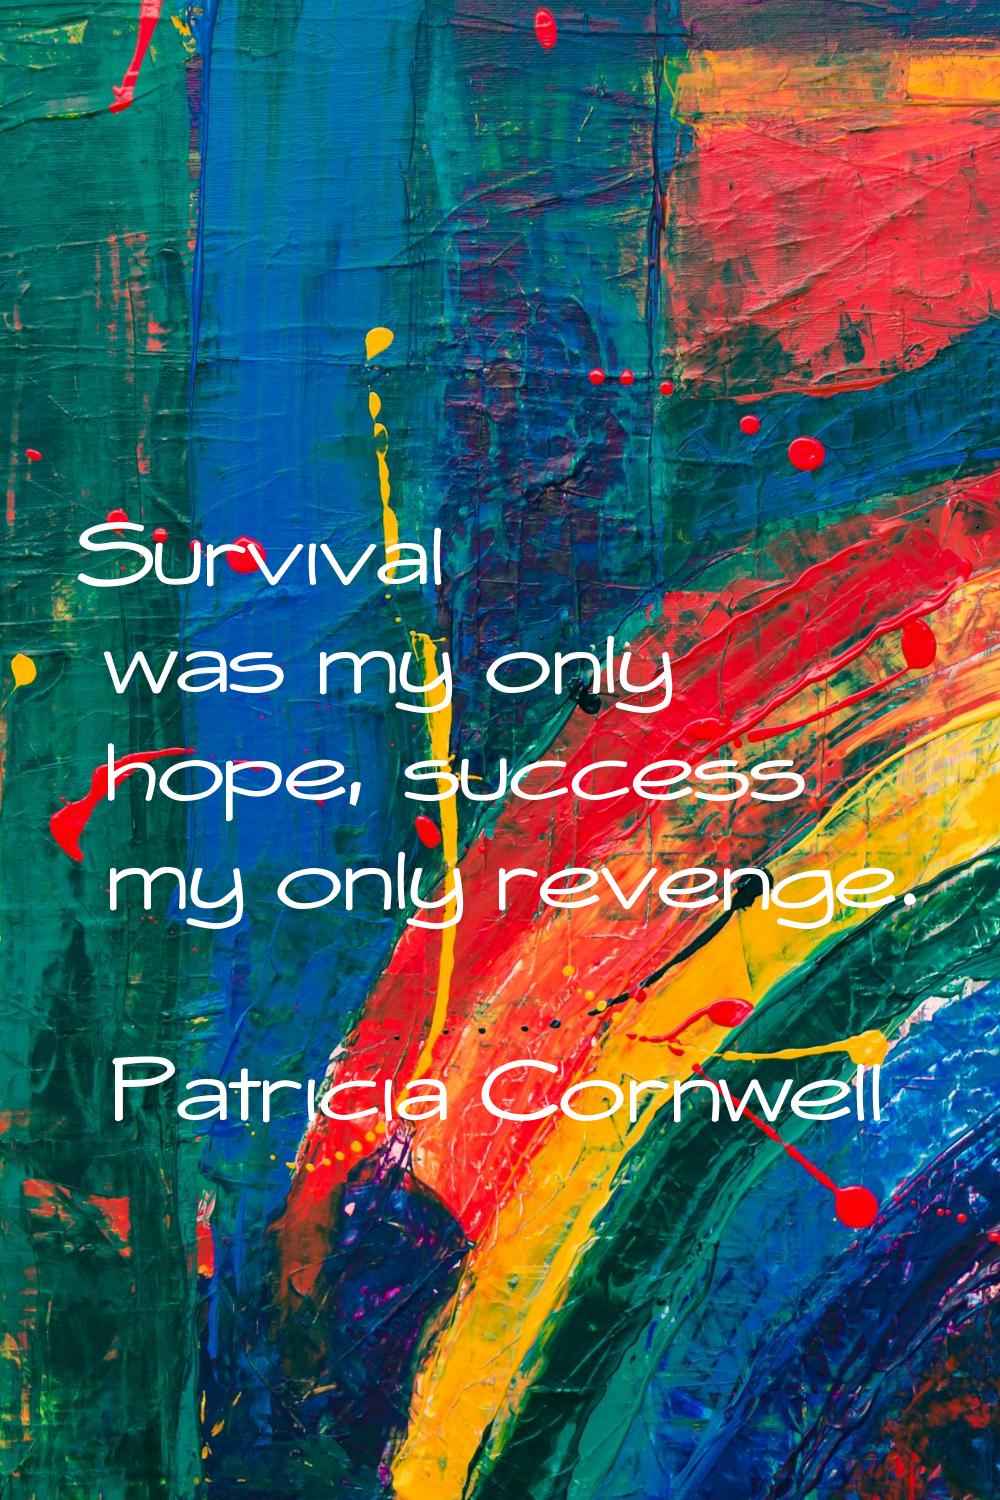 Survival was my only hope, success my only revenge.